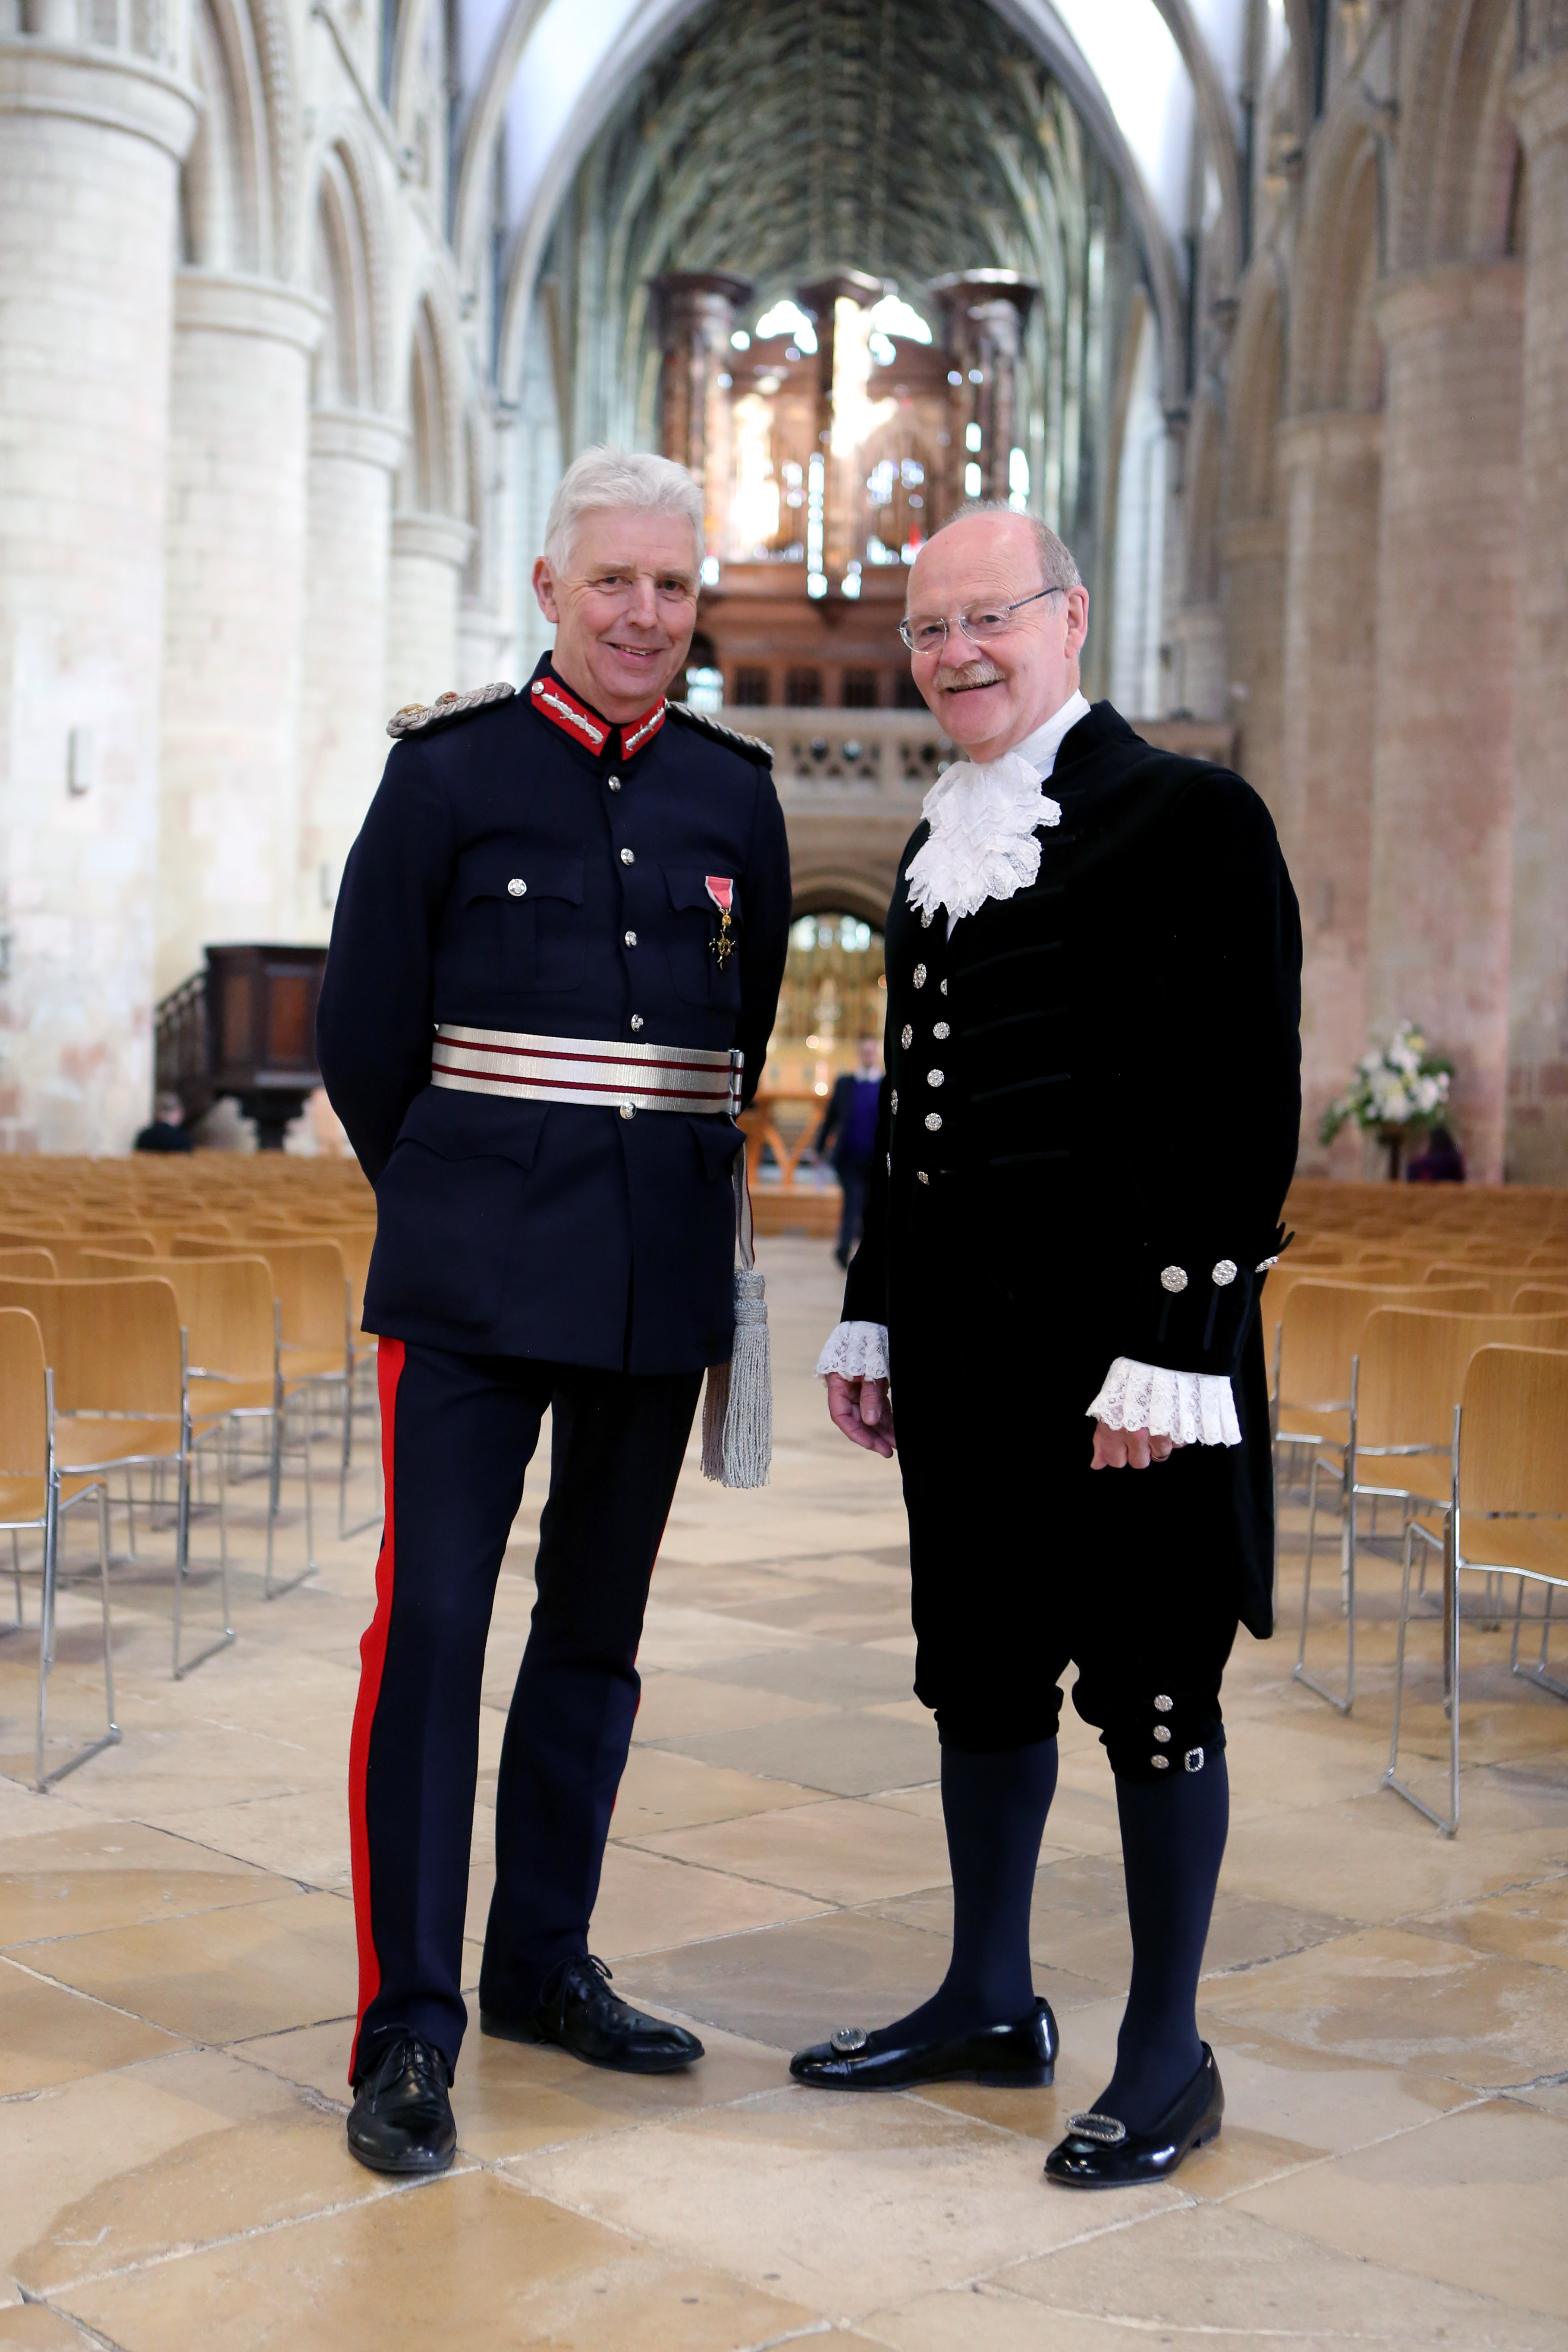 Mark with Edward Gillespie, Lord Lieutenant of Gloucestershire